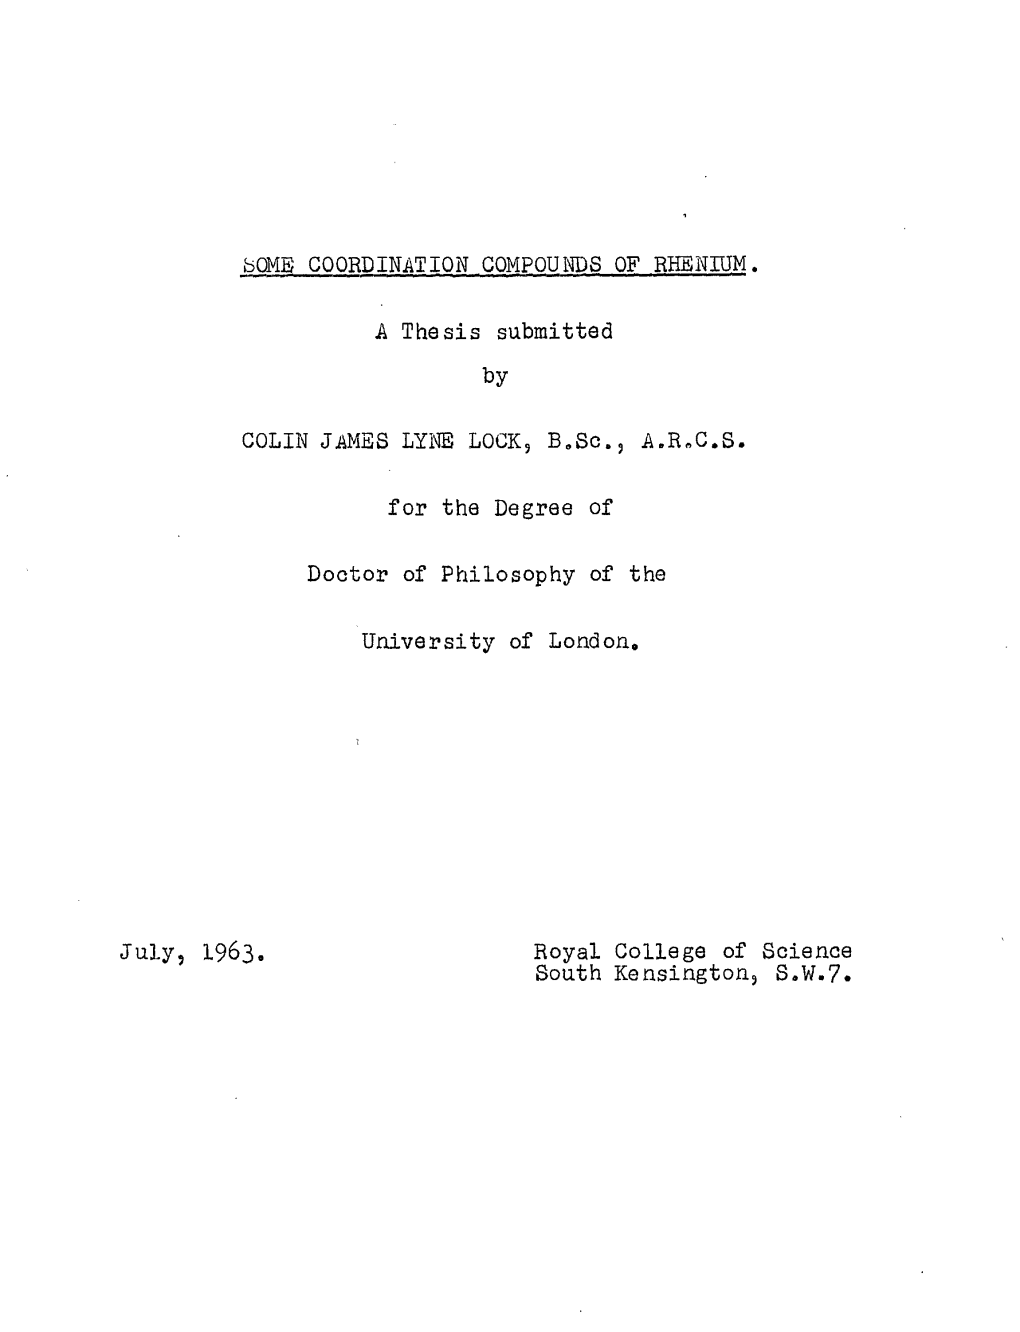 A Thesis Submitted by COLIN JAMES LYNE LOCK, B.Sc., A.RX.S. for The